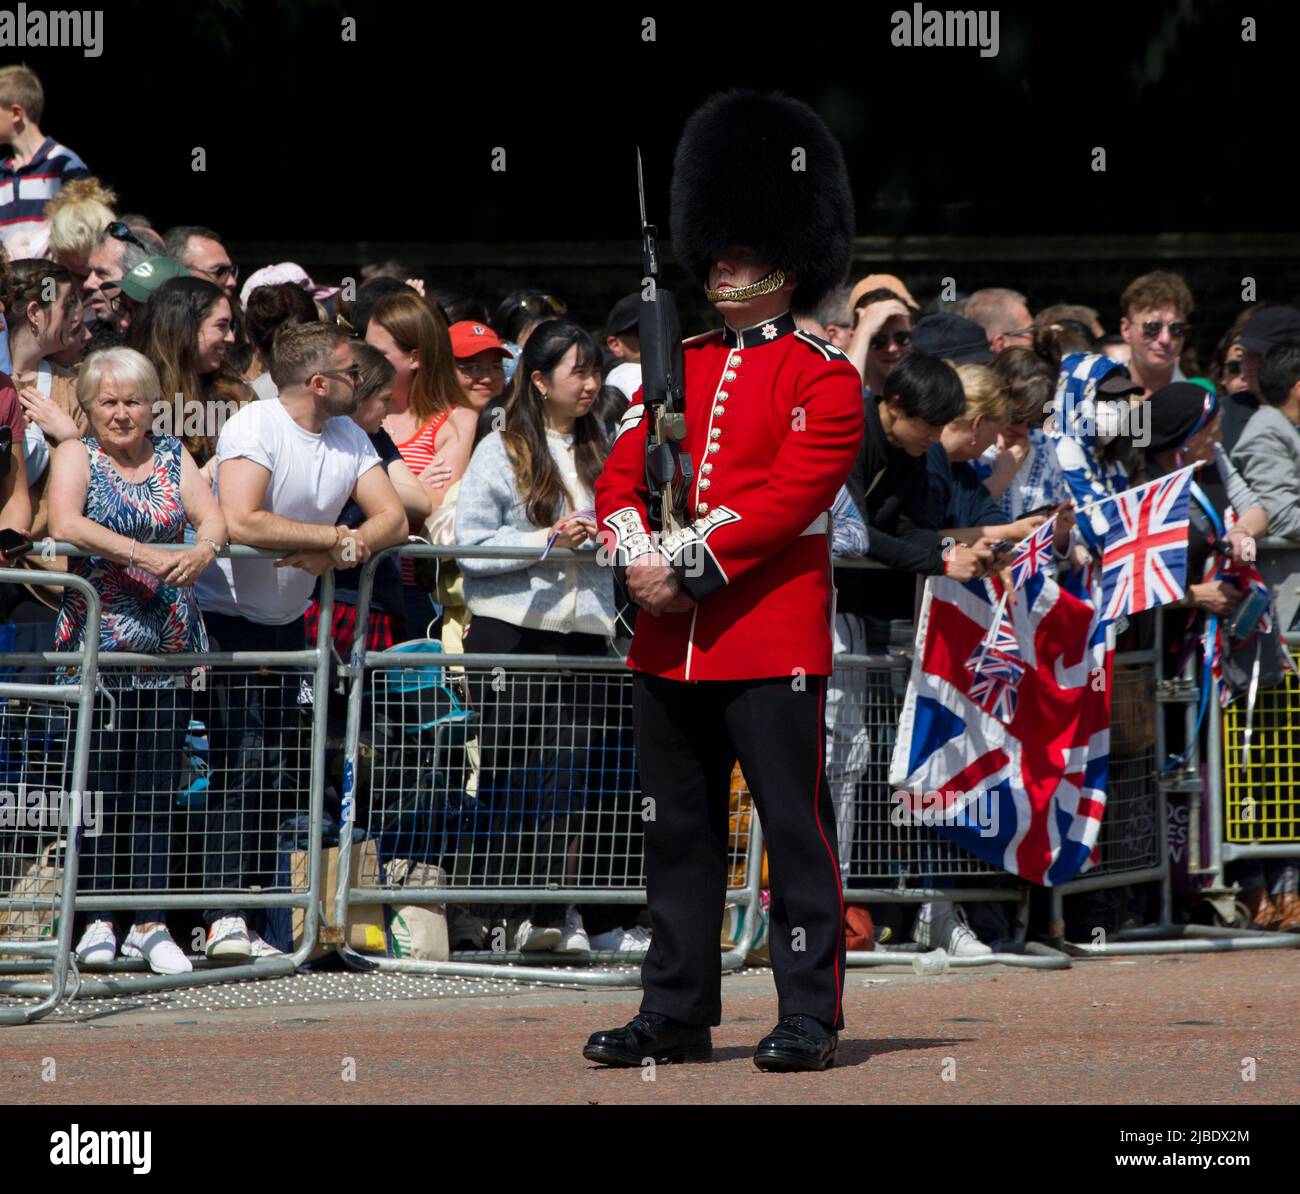 Flag Waving Crowd The Queen's Platinum Jubilee Trooping The Colour Color The Mall London Stock Photo